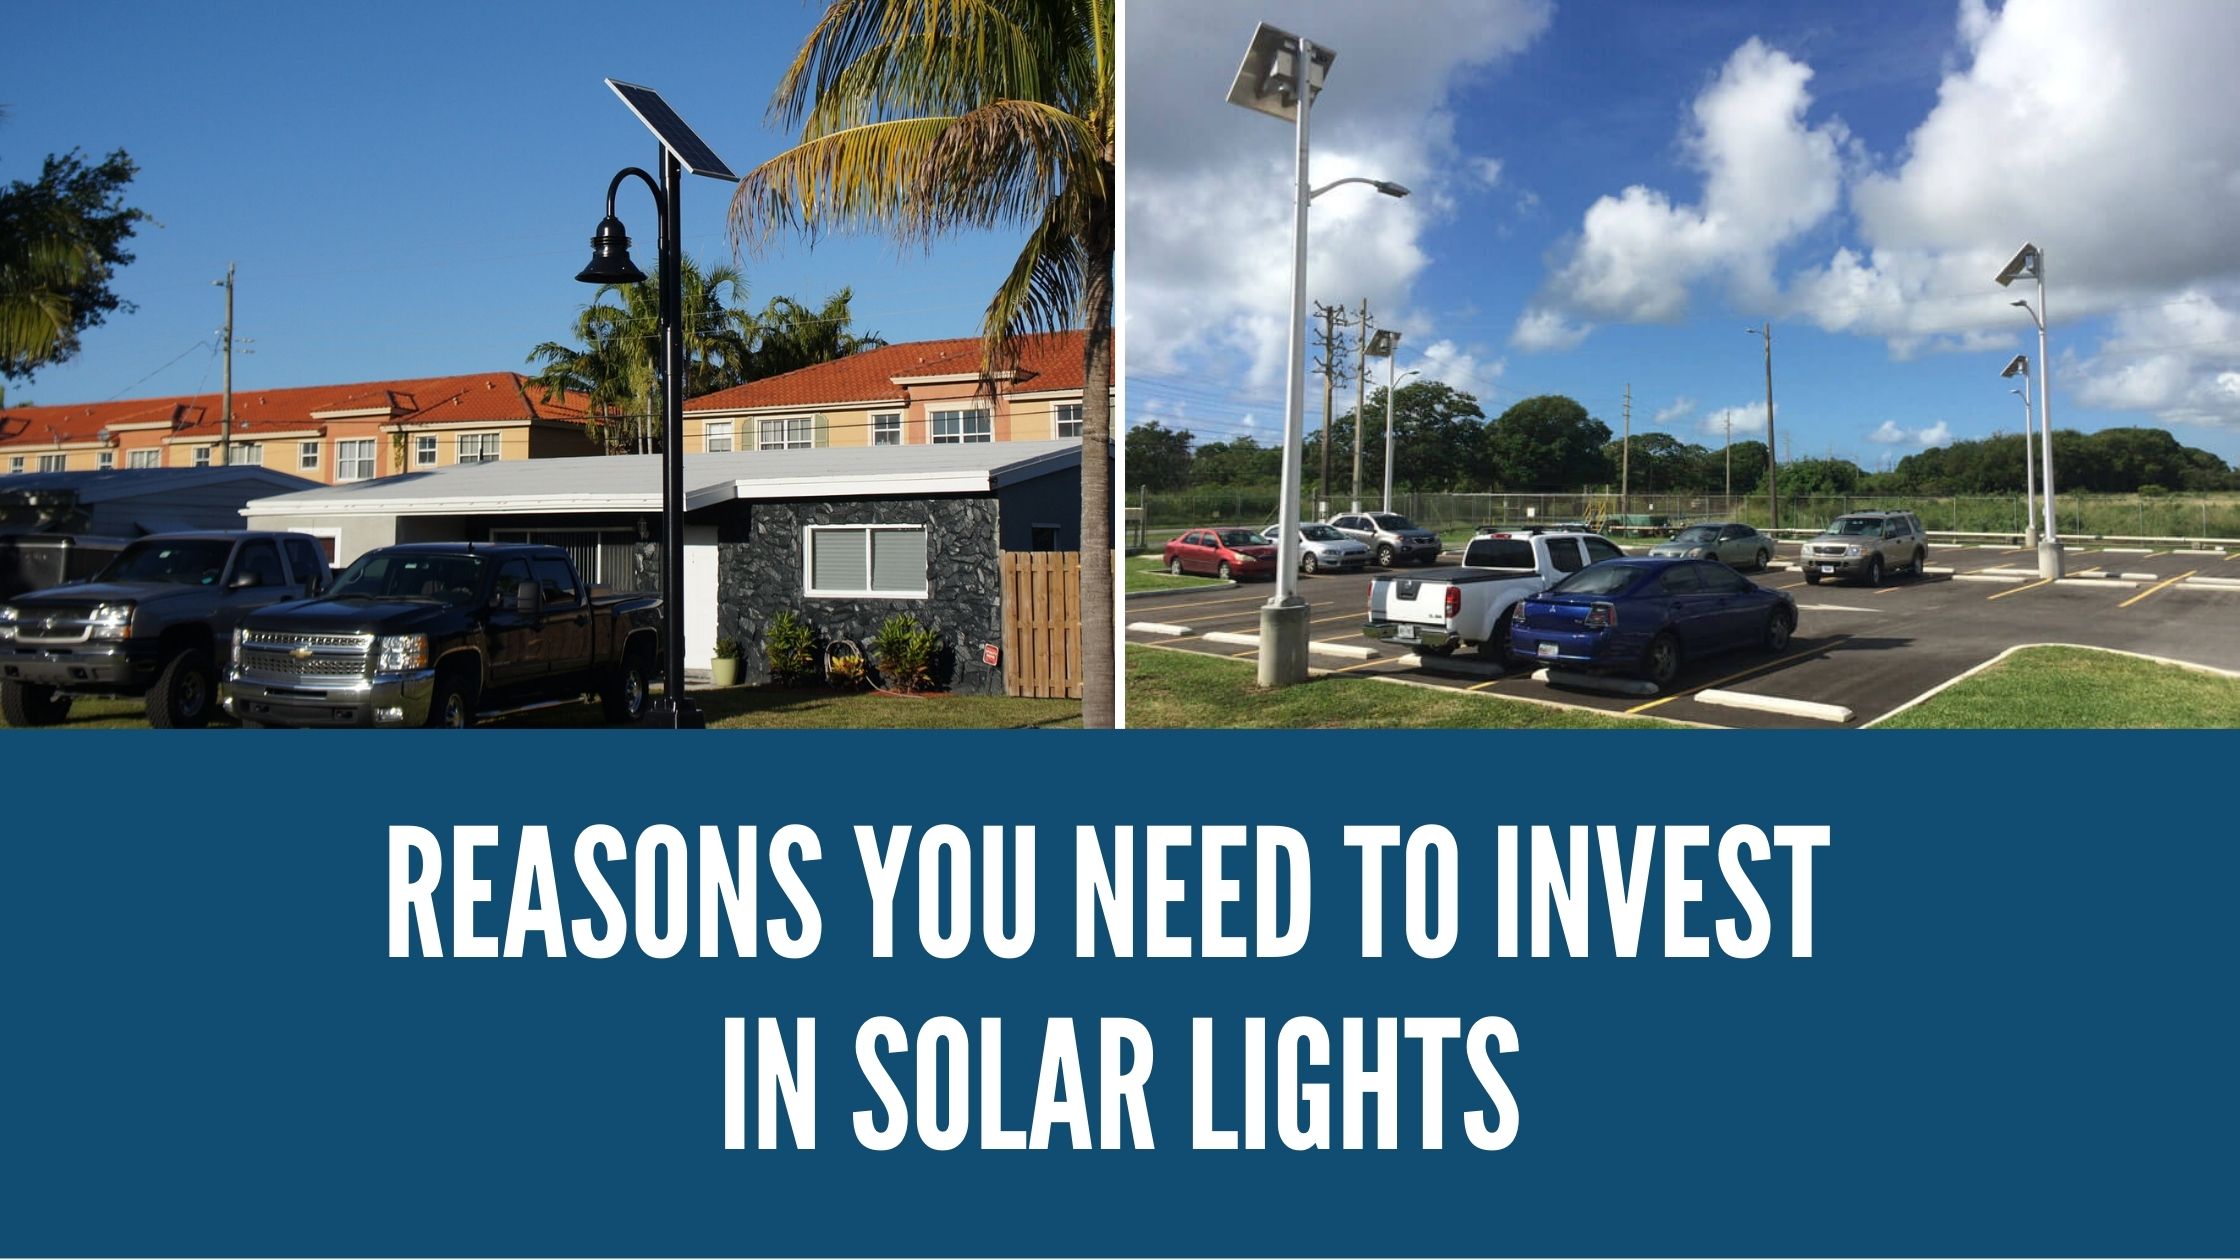 Reasons You Need to Invest in Solar Lights